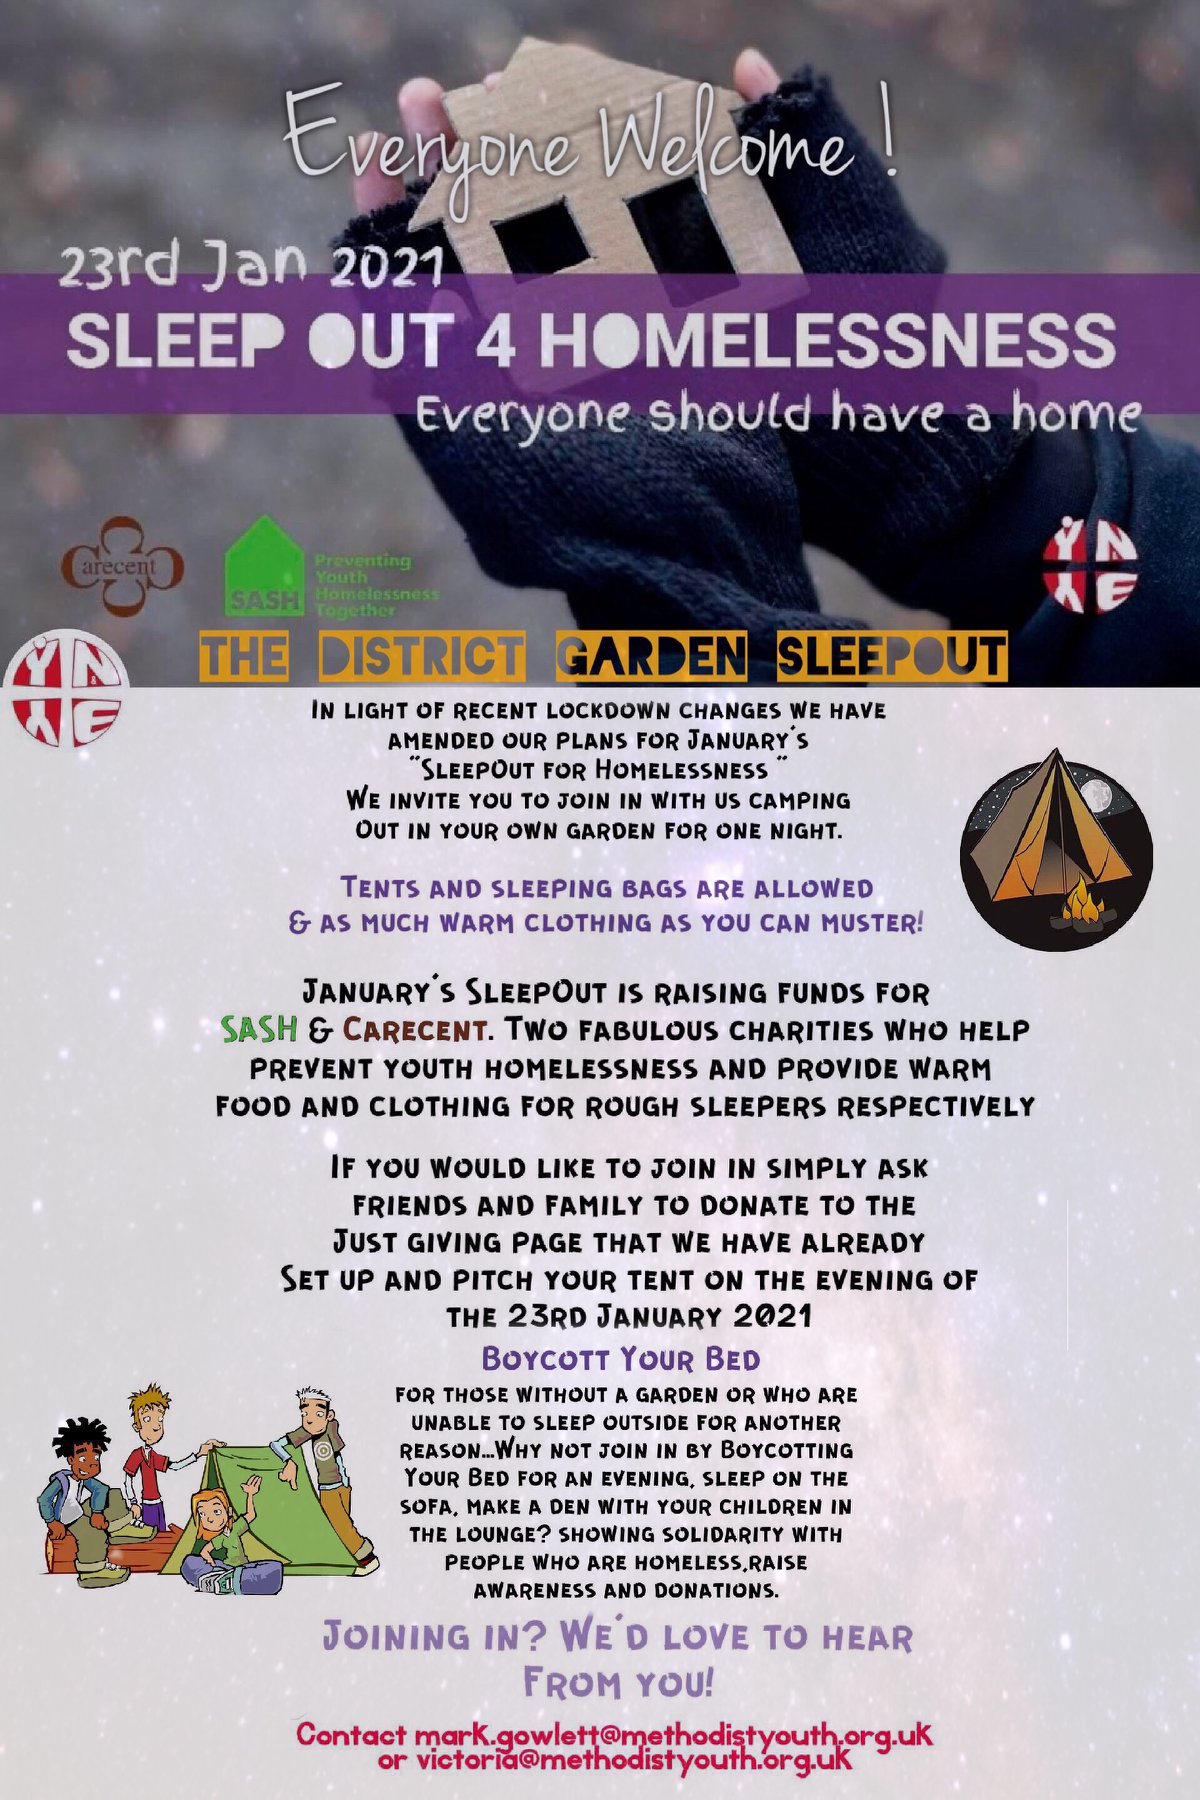 Sleep out for Homelessness Yorkshire North & East Methodist District